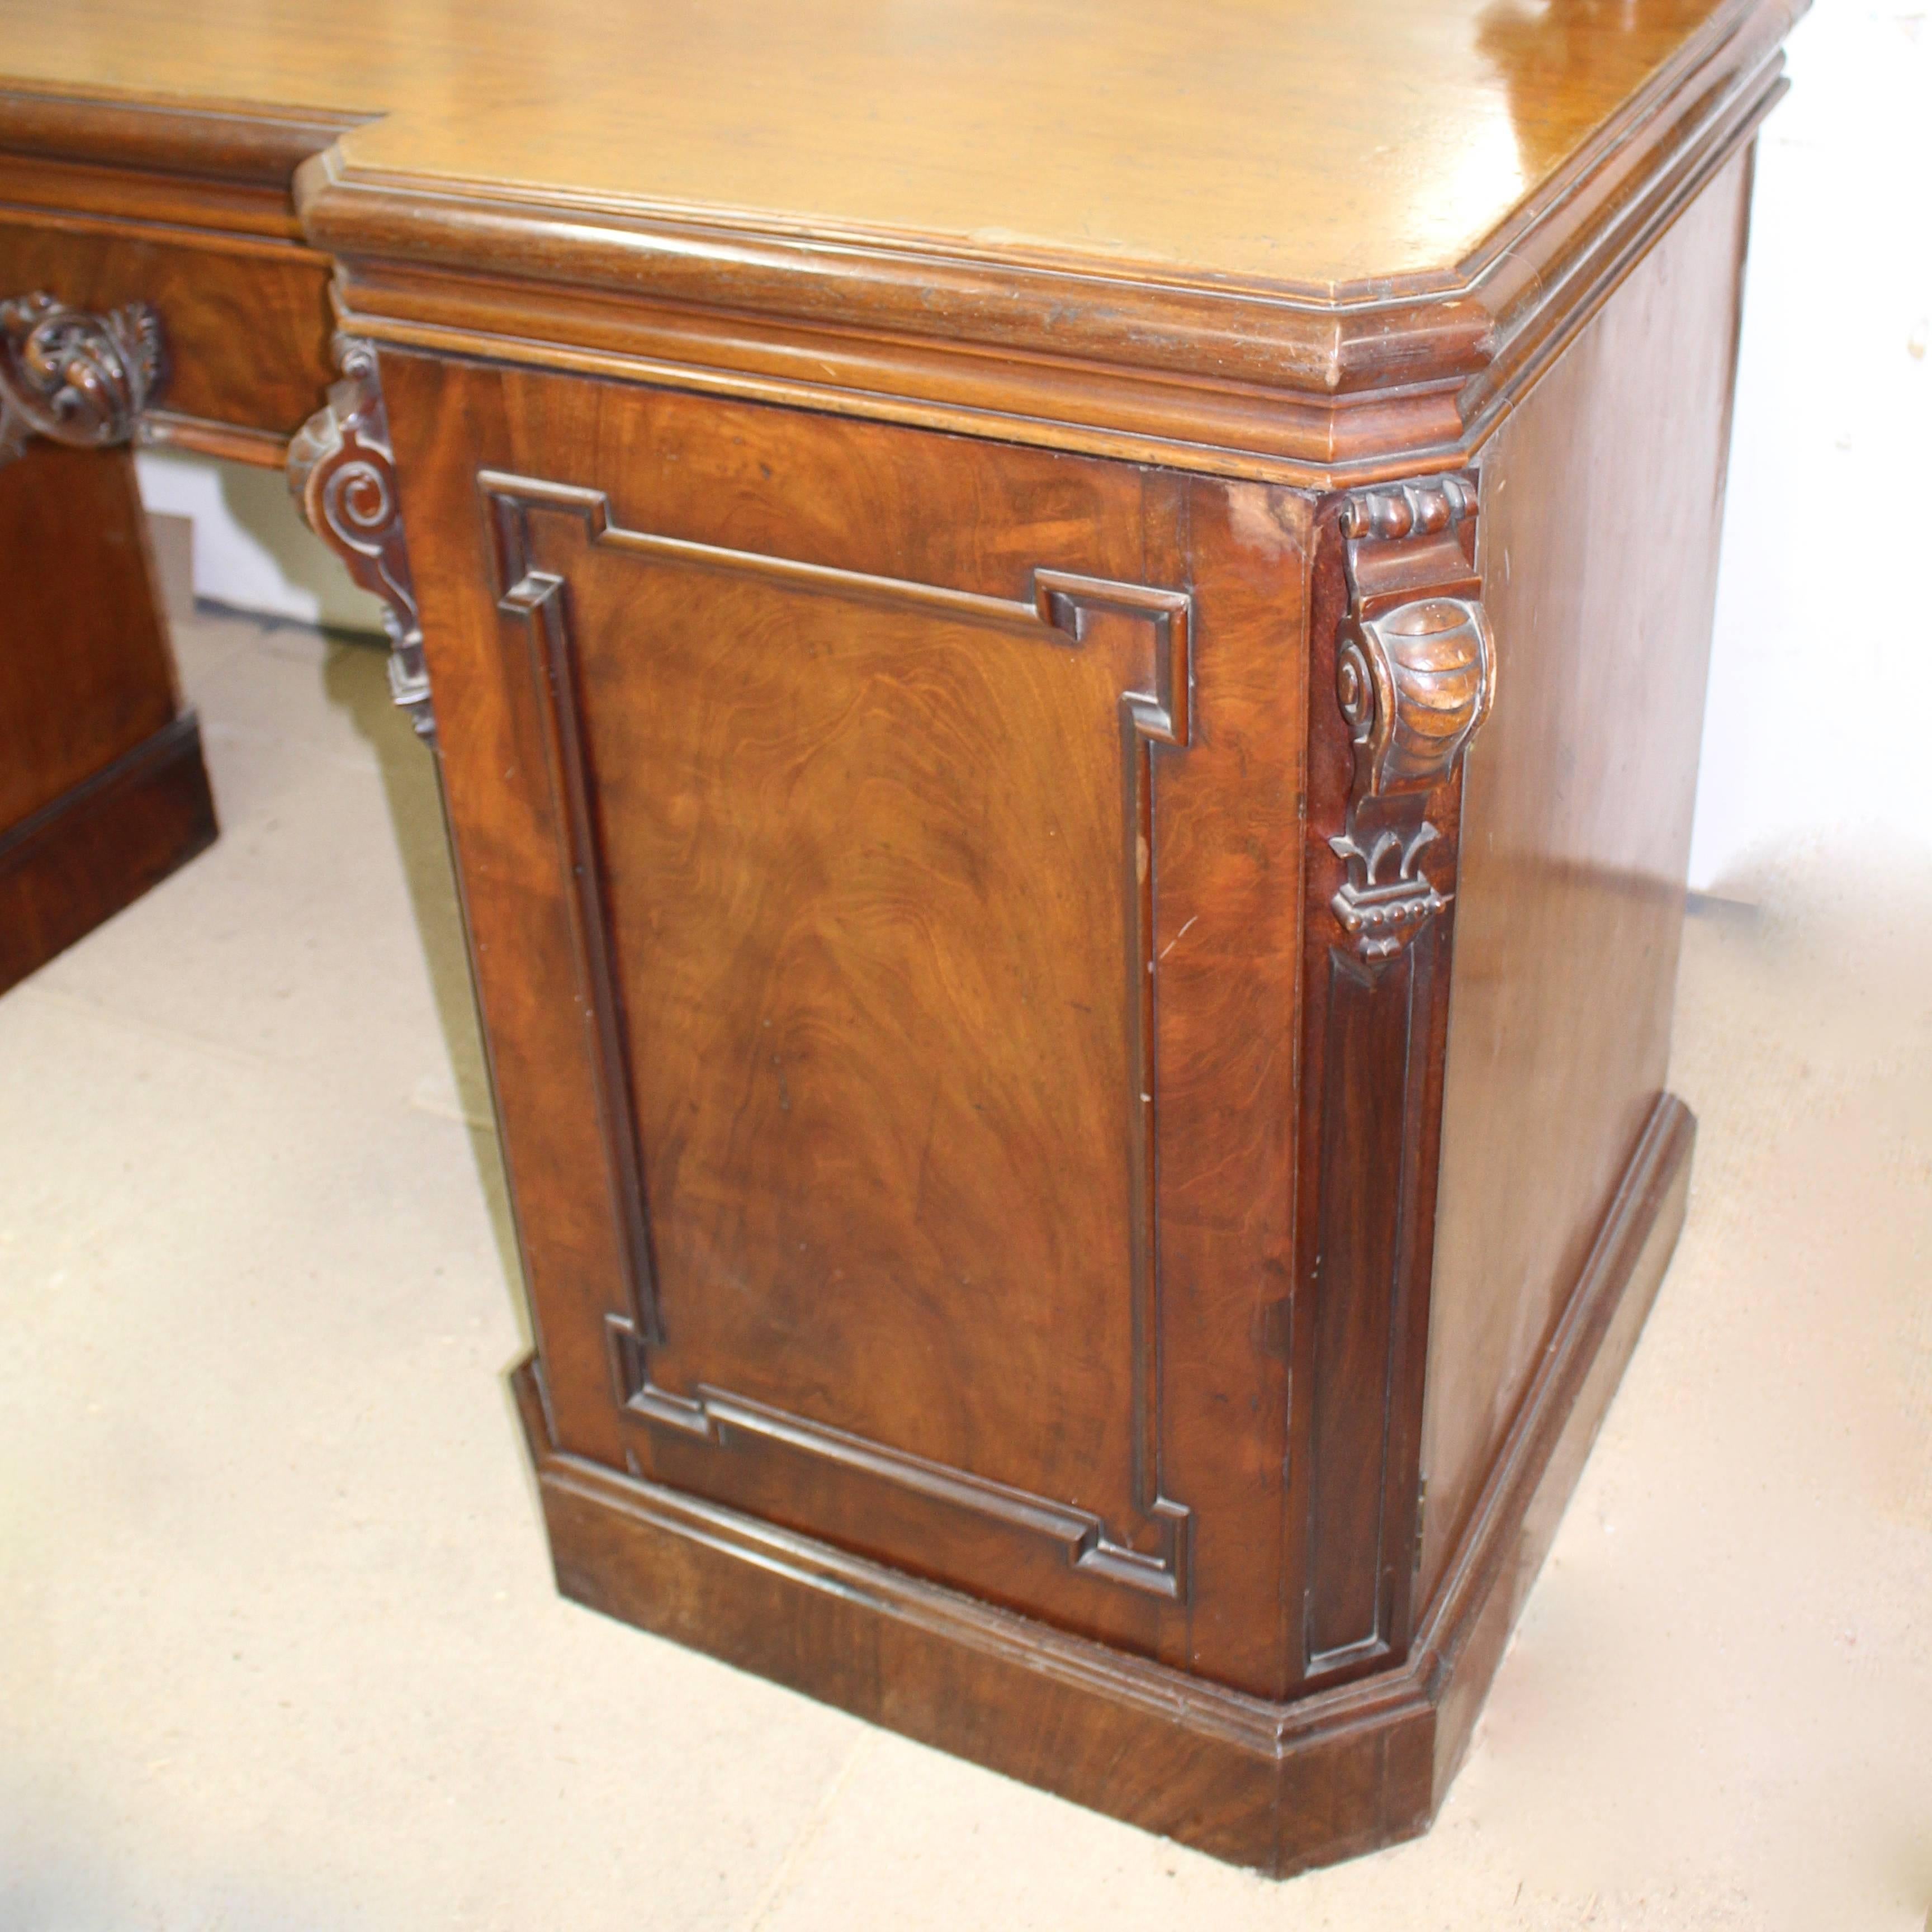 Victorian Mahogany Mirrored Sideboard In Excellent Condition For Sale In Heathfield, East Sussex